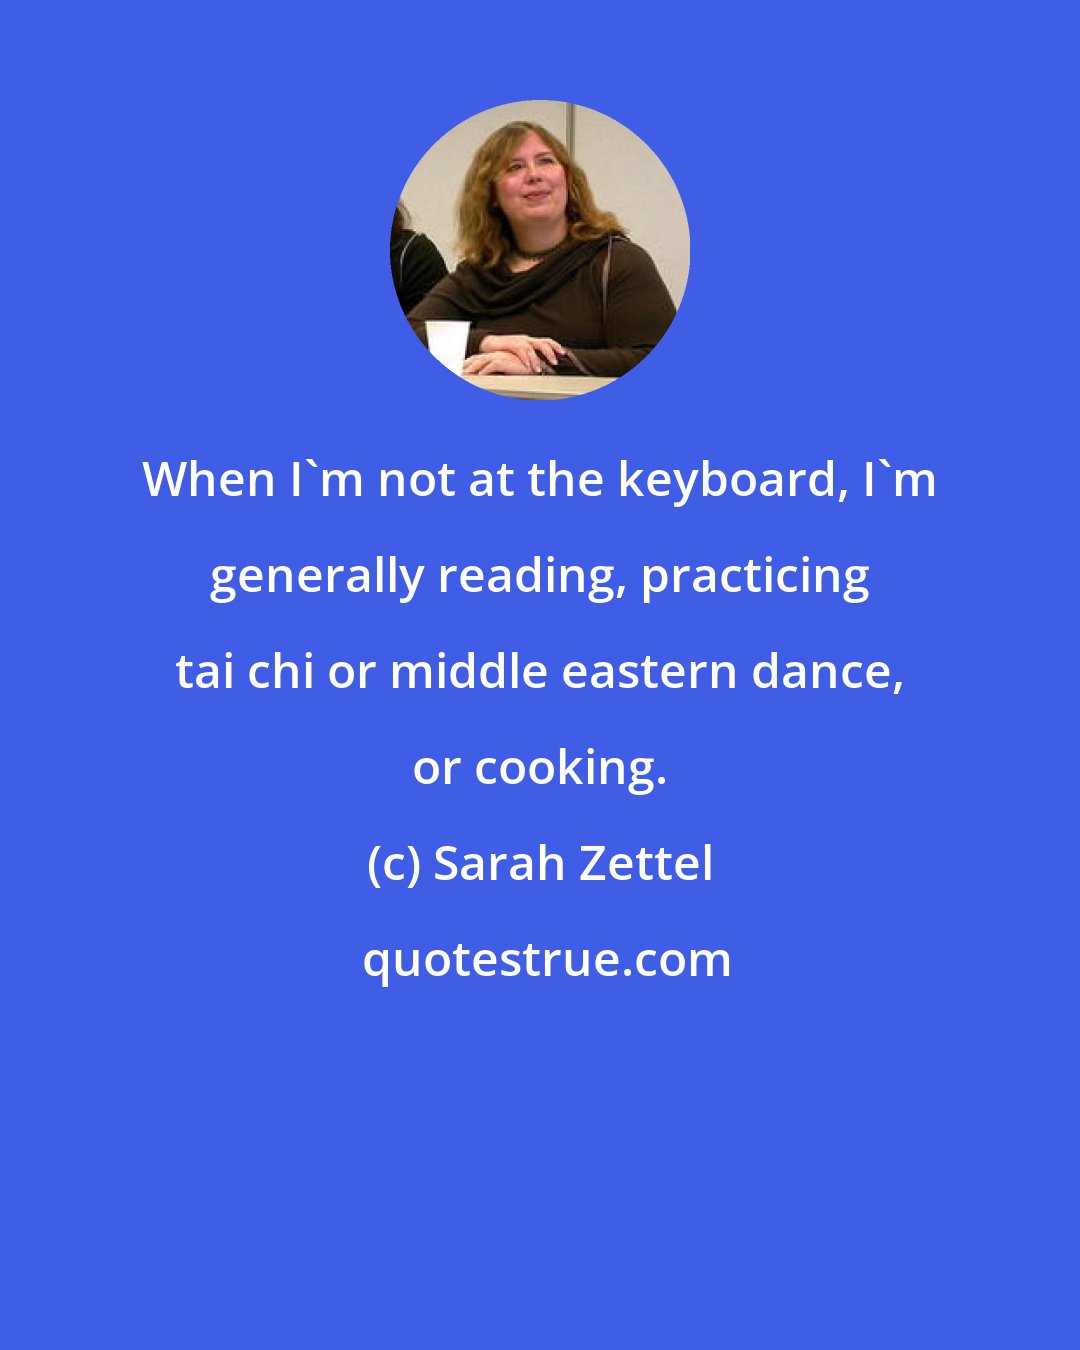 Sarah Zettel: When I'm not at the keyboard, I'm generally reading, practicing tai chi or middle eastern dance, or cooking.